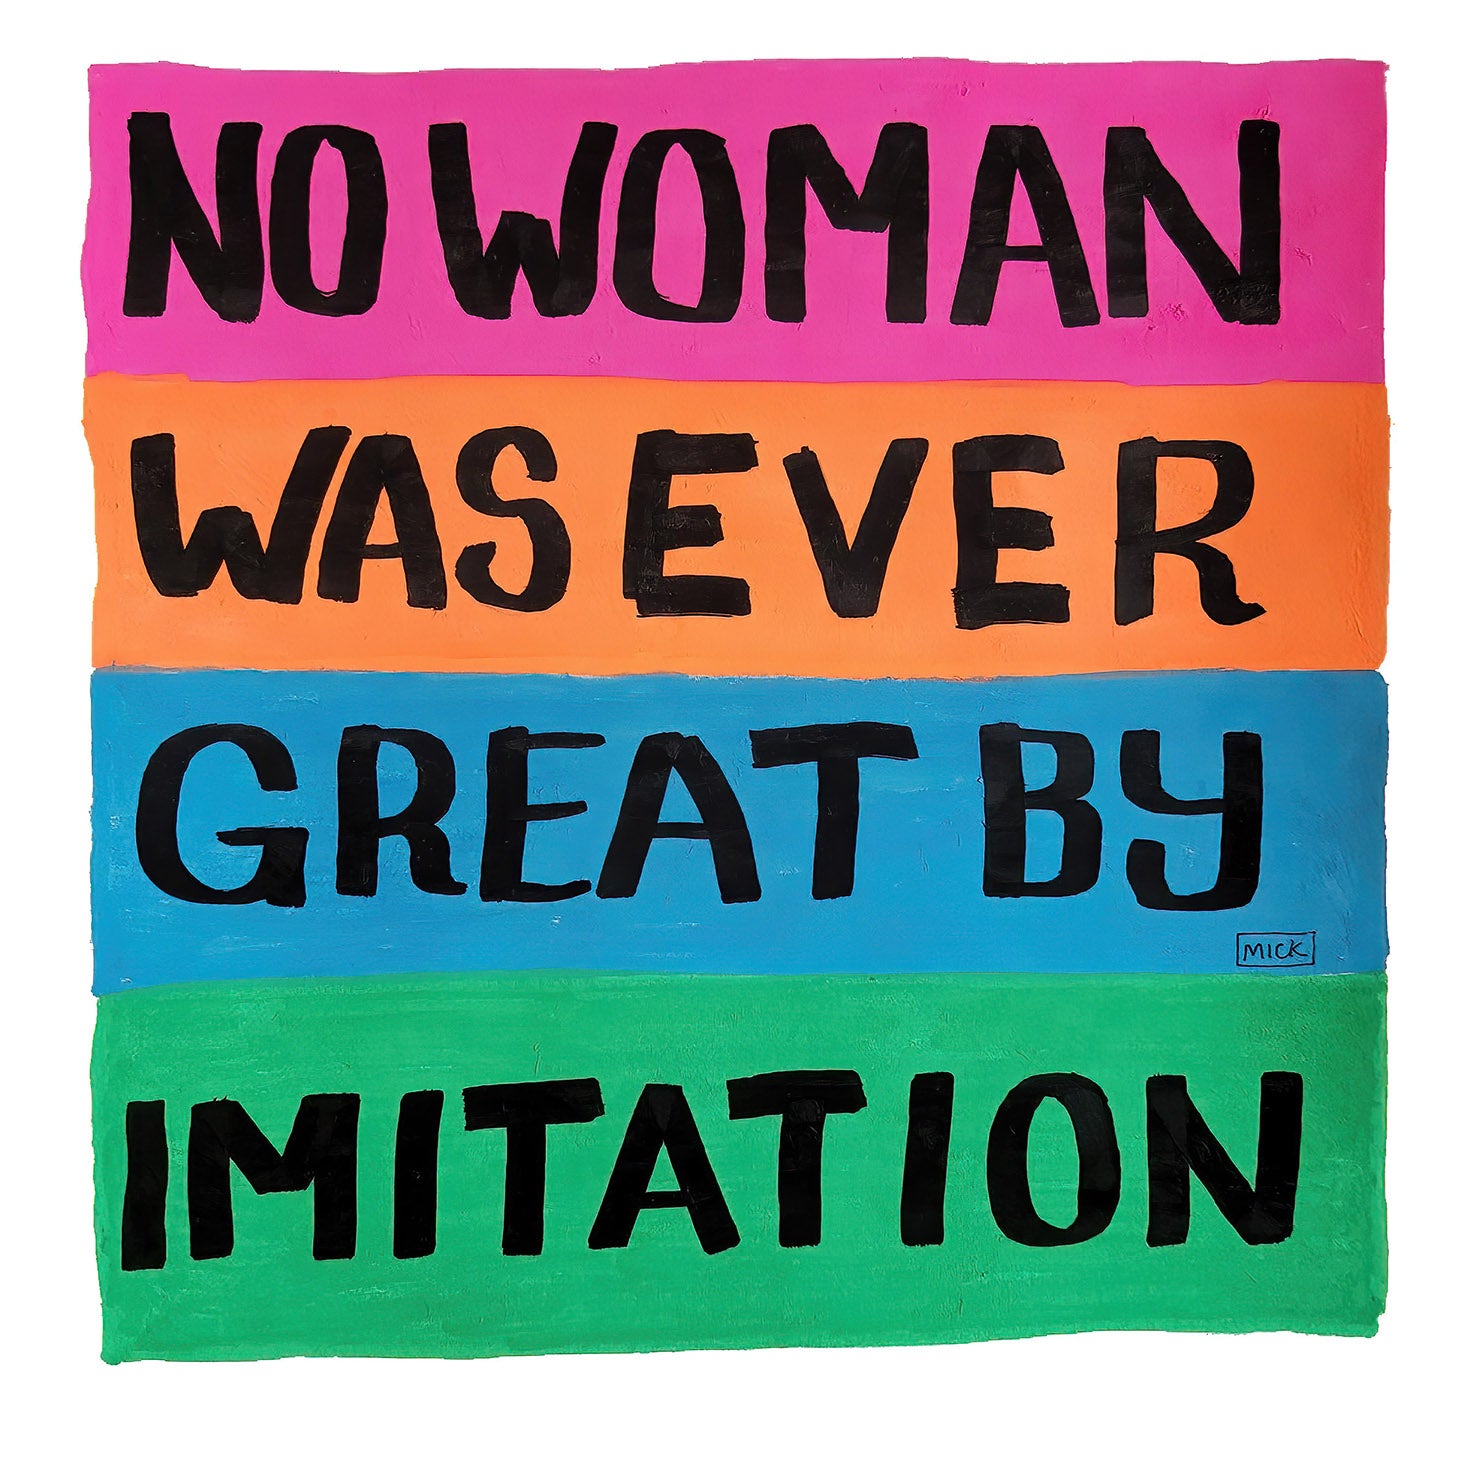 Hand Illustrated slogan text is in capitals in black. NO Woman on Pink band of colour, Was Ever on Orange band of colour, Great By on Blue band of colour, Imitation on Green band of colour.